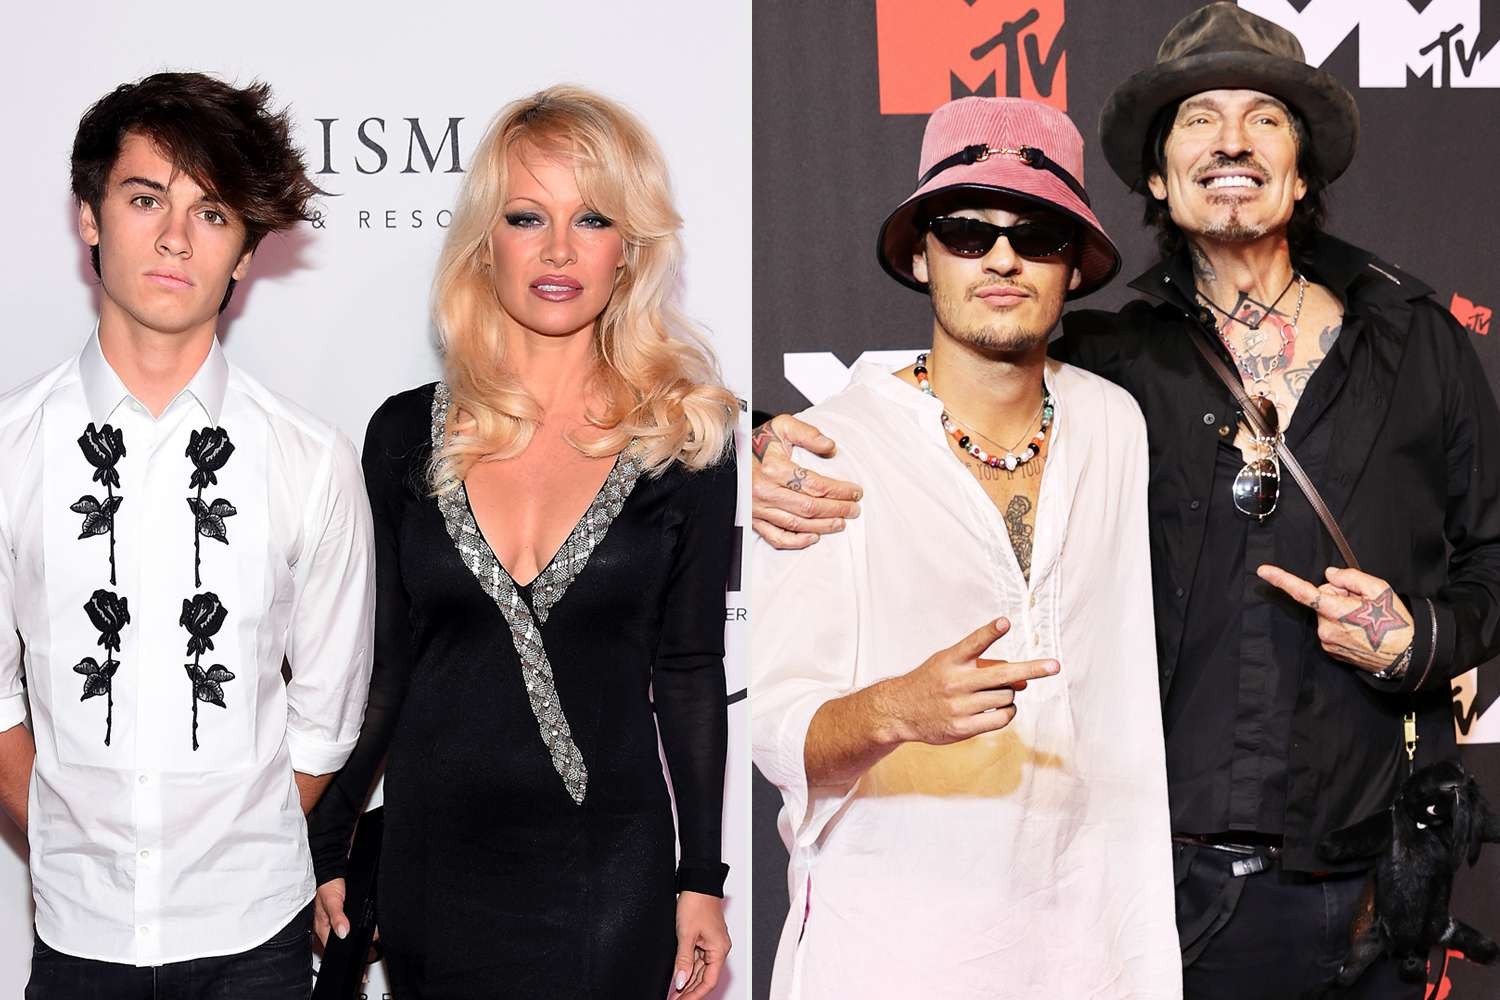 Pamela Anderson and Tommy Lee with their kids